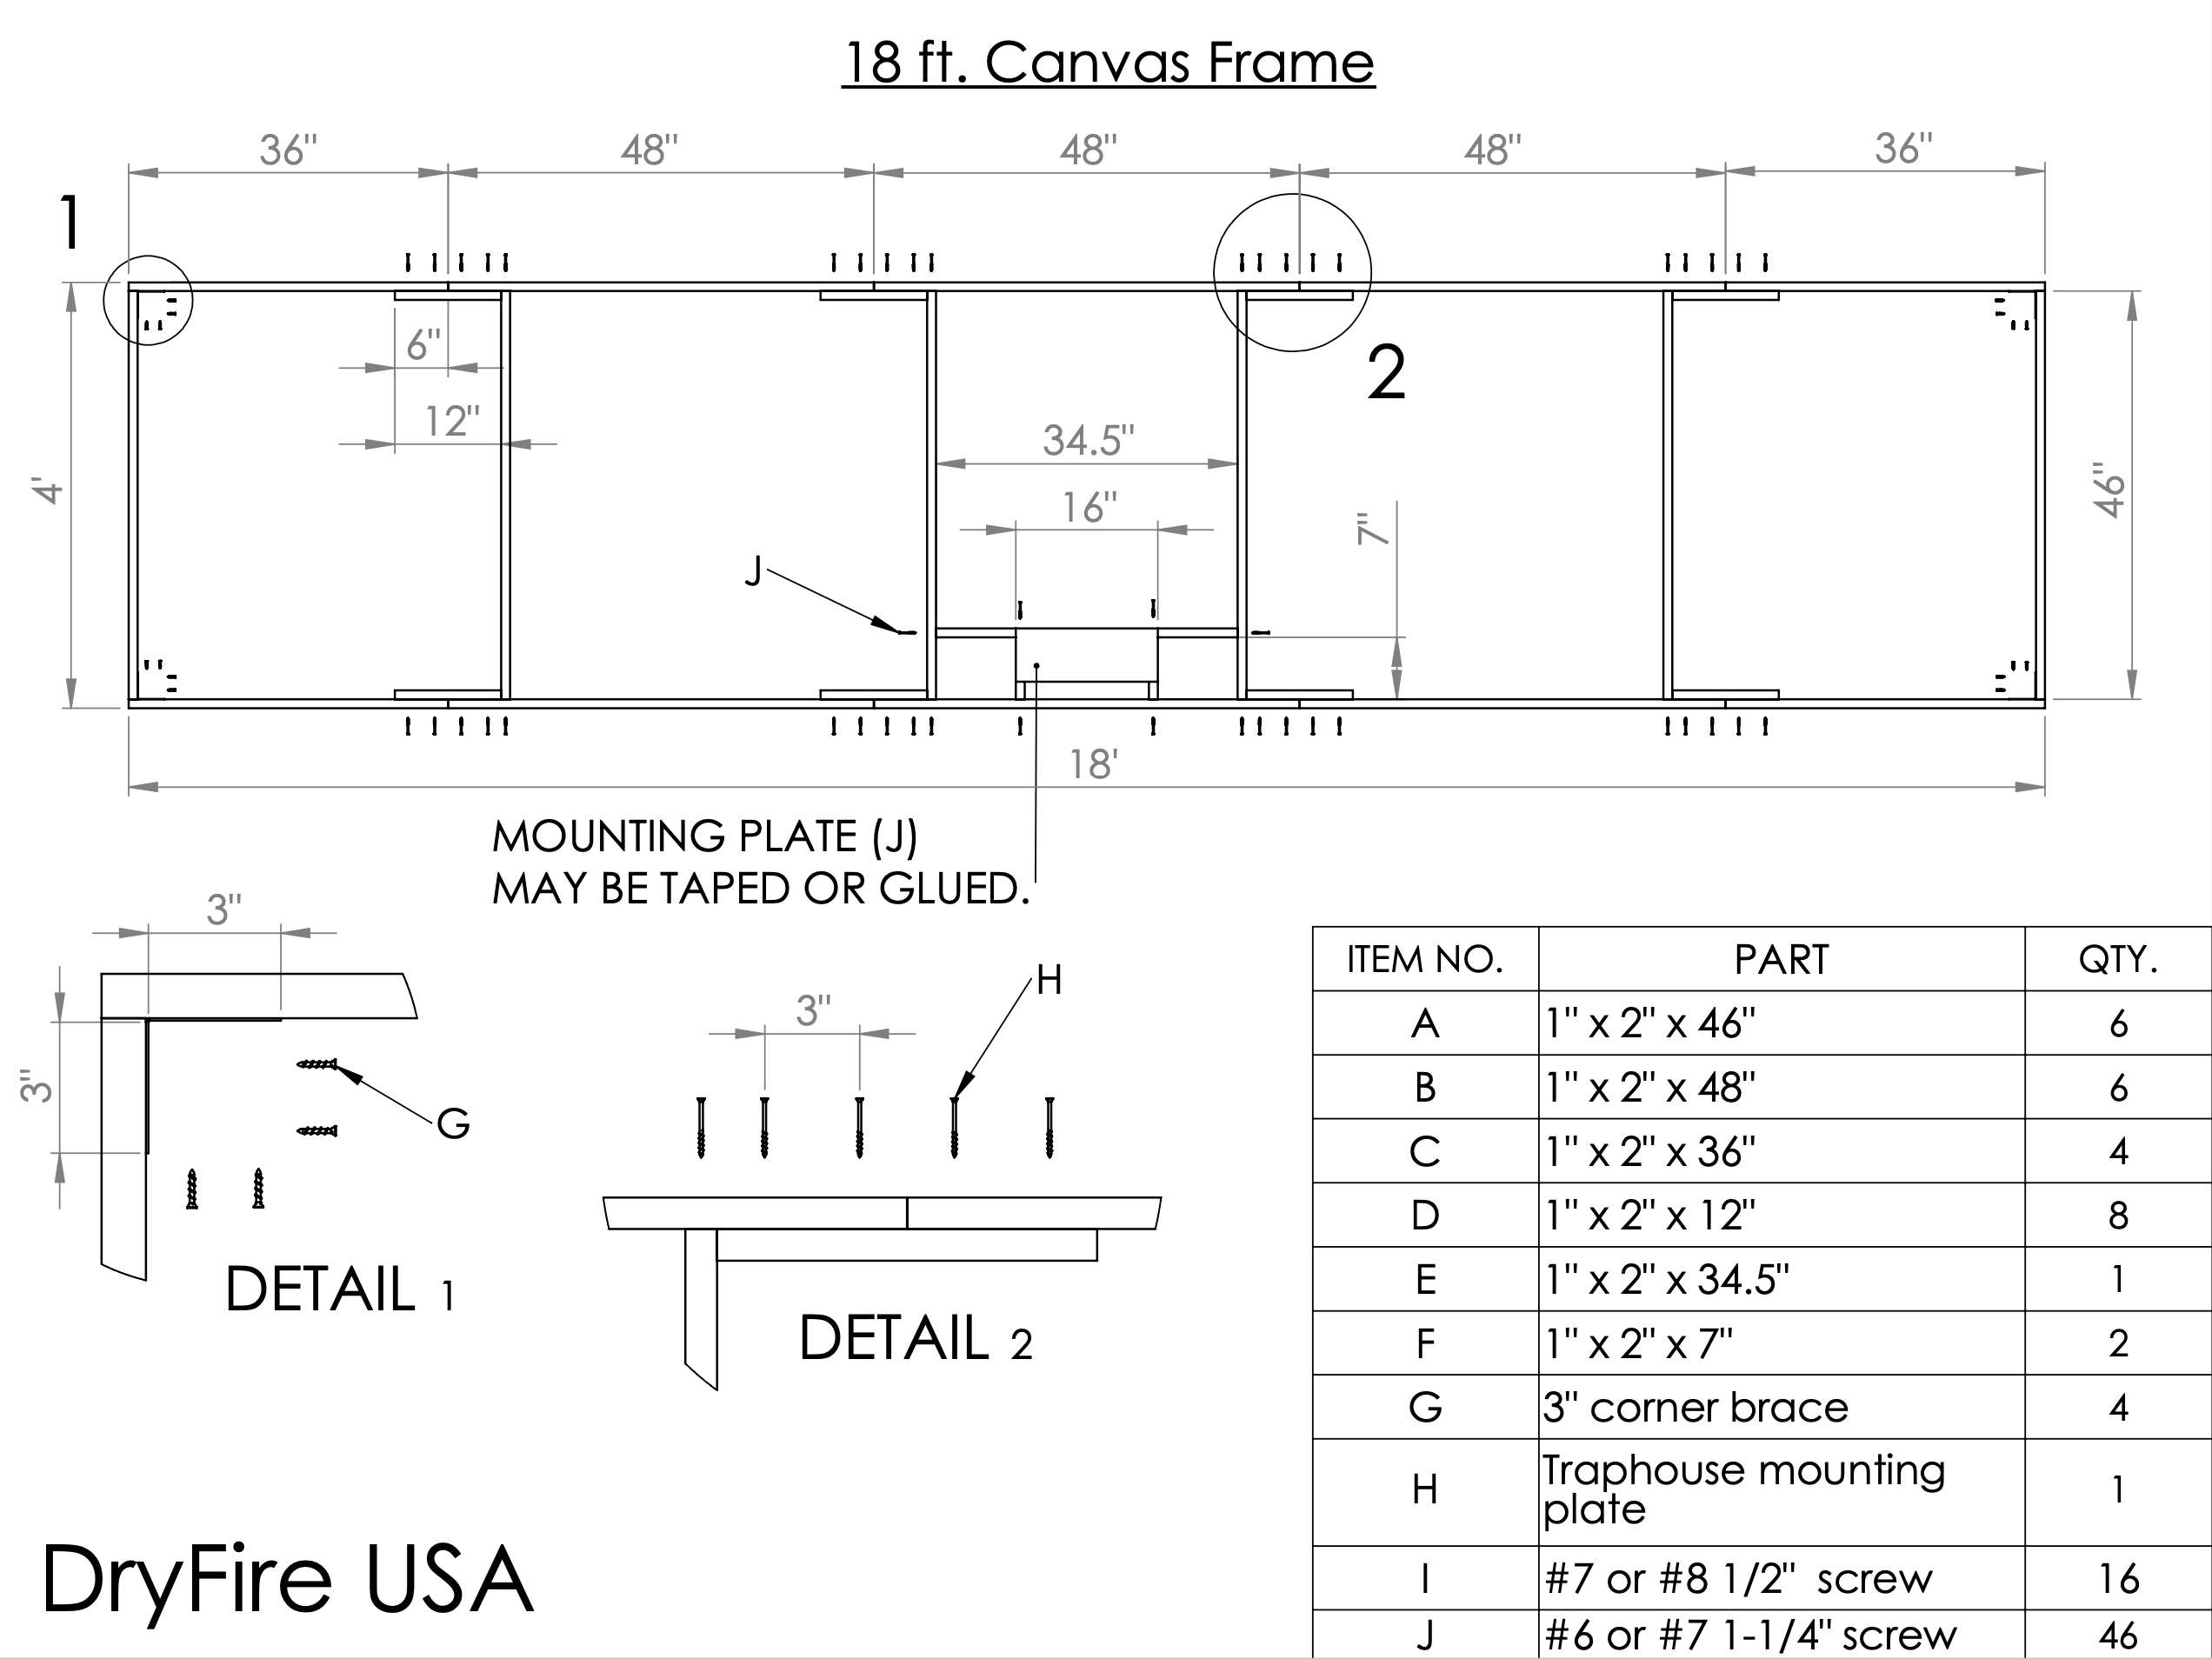 Preview Image - 18 foot frame for DryFire USA Canvas Background Shooting Screen for indoor trap and skeet practice